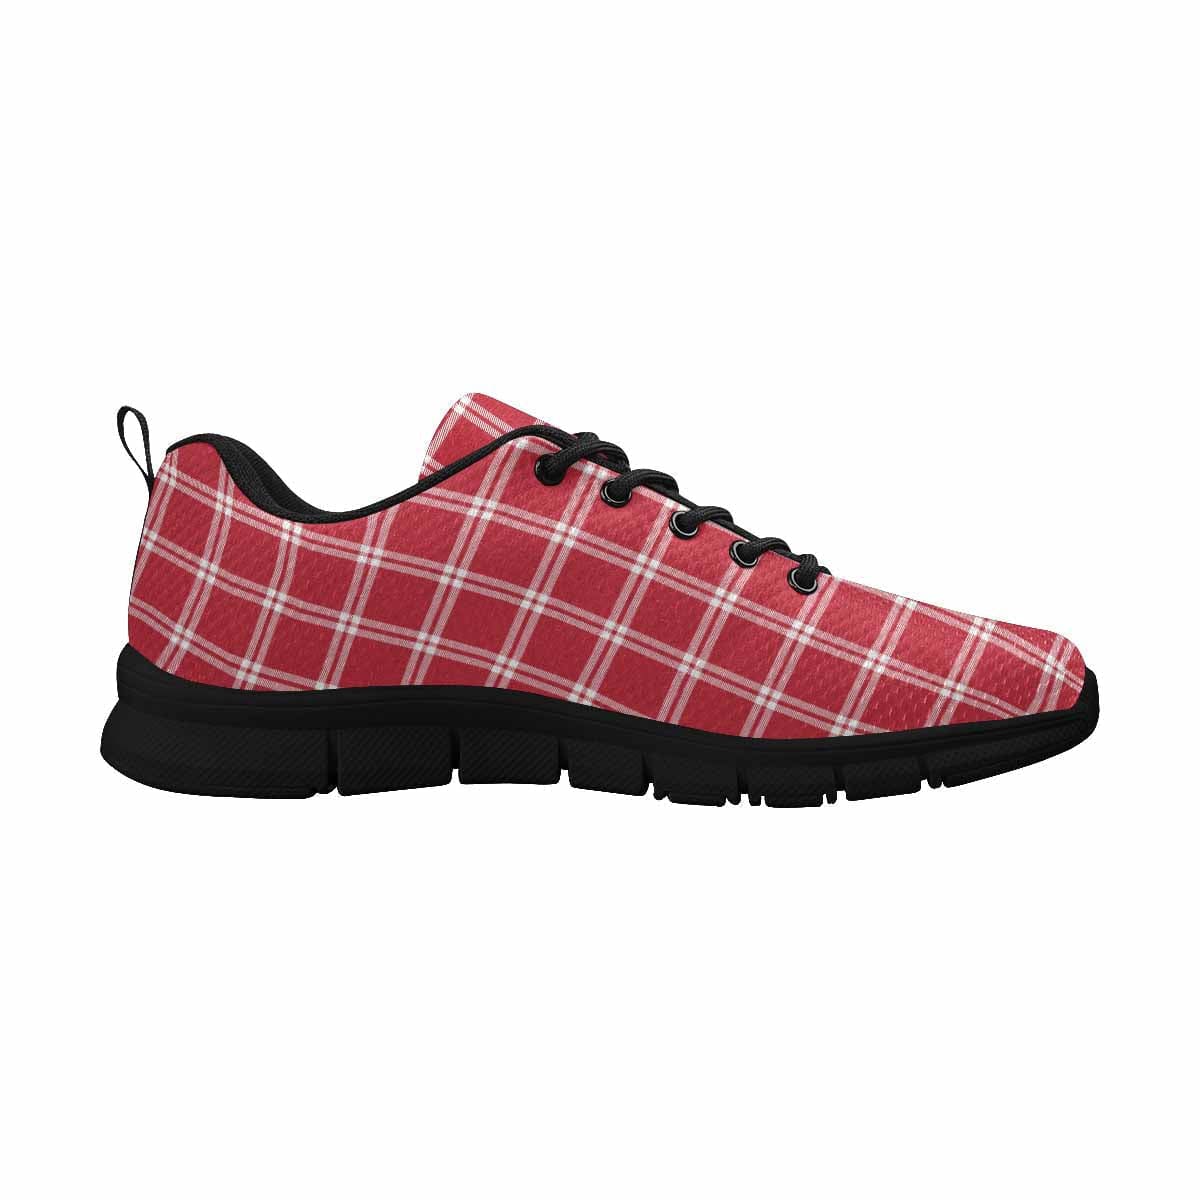 Sneakers For Men Buffalo Plaid Red And White Running Shoes Dg864 - Mens